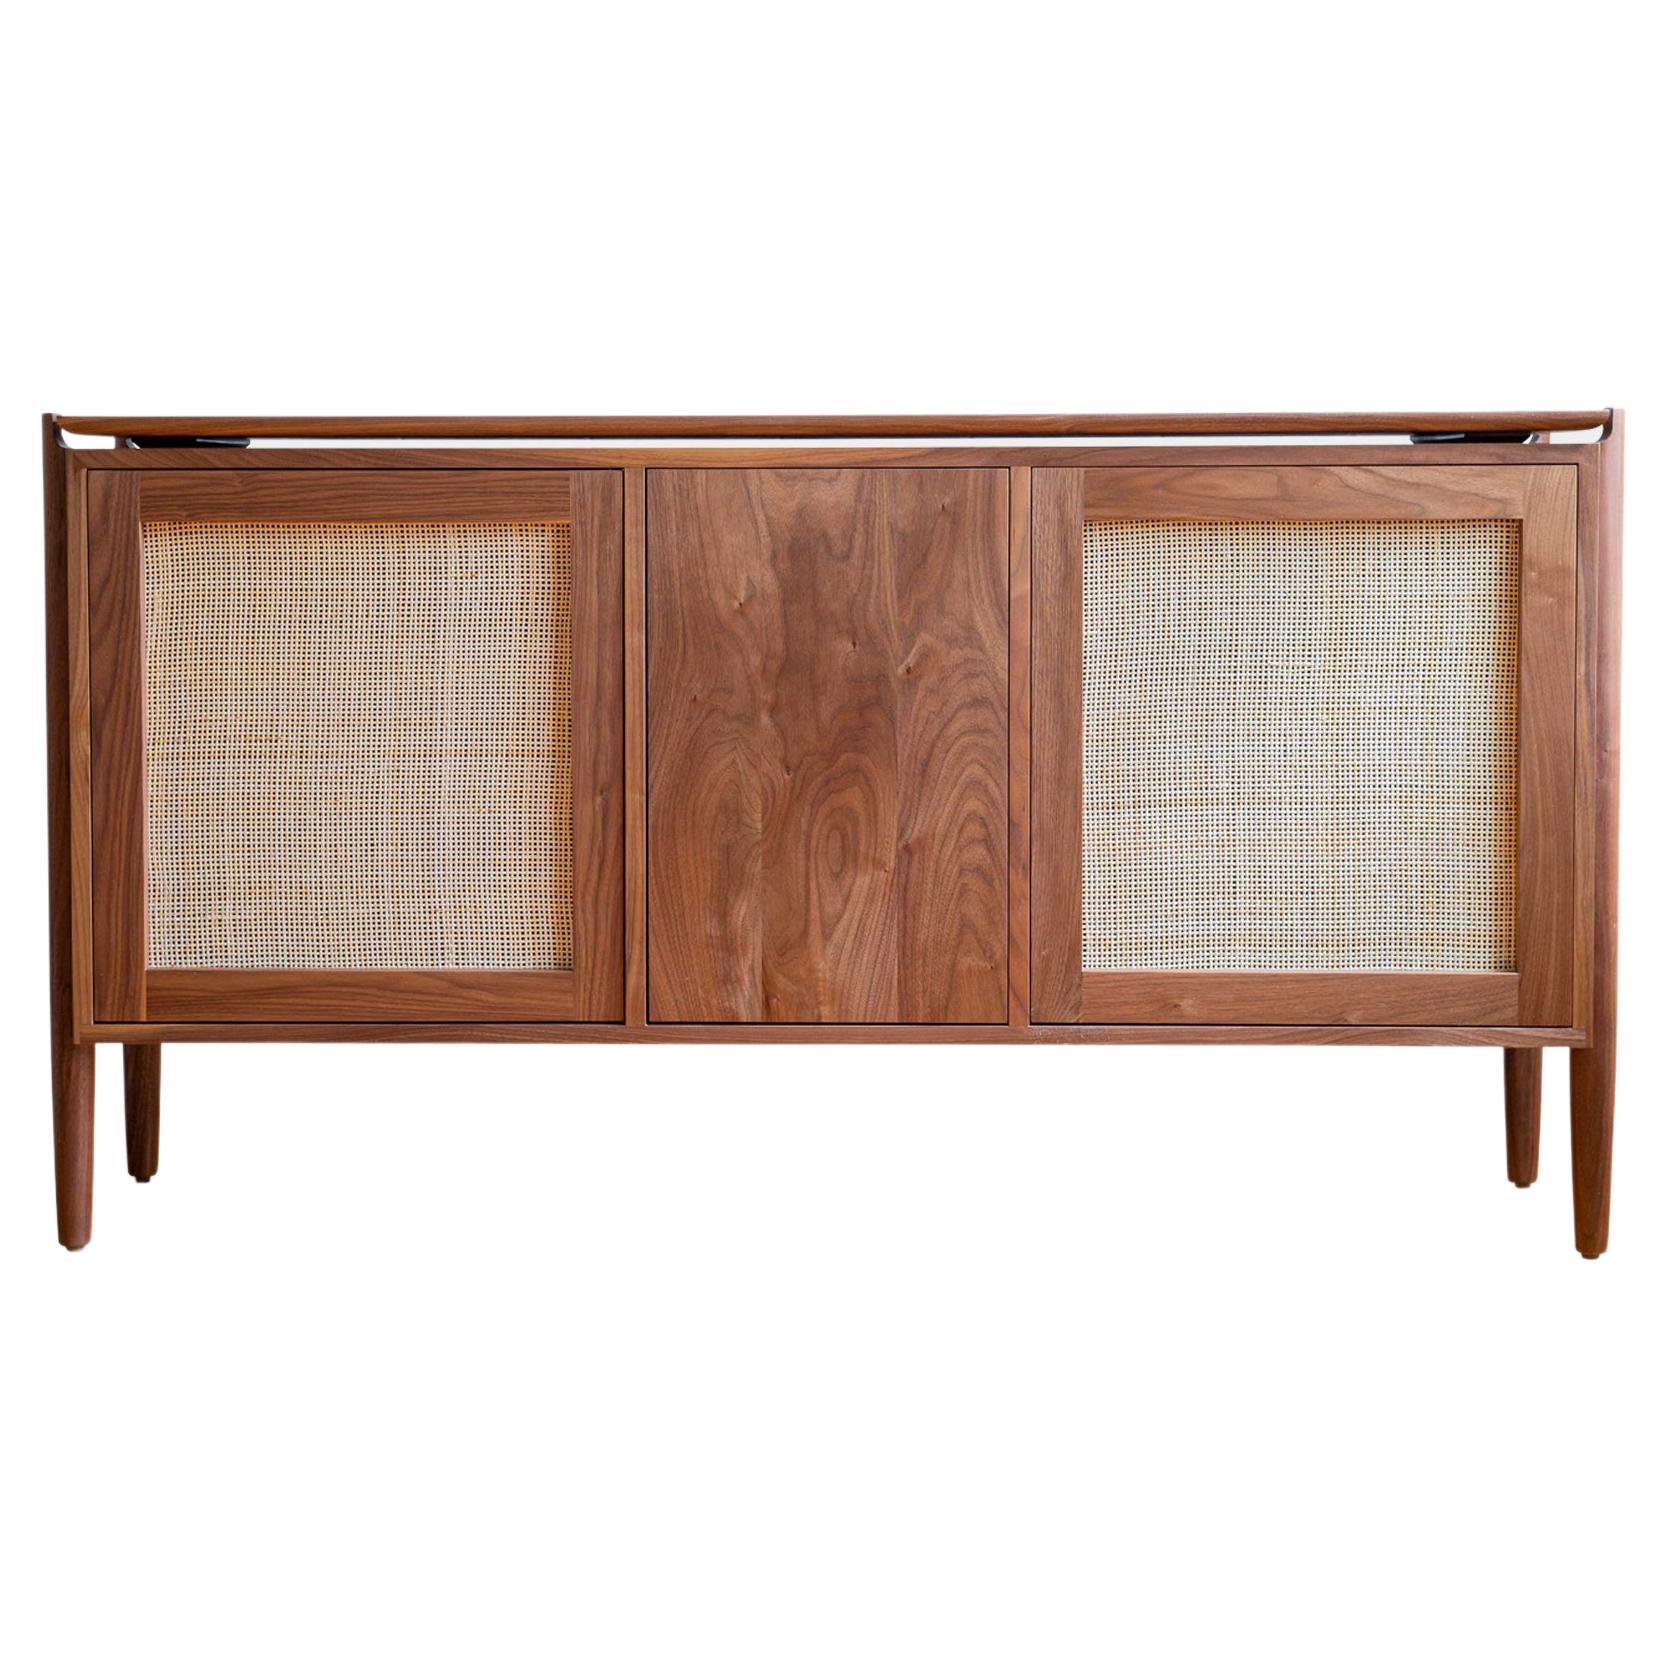 Low KABOT Sideboard in Walnut with 3 Cabinet Doors For Sale